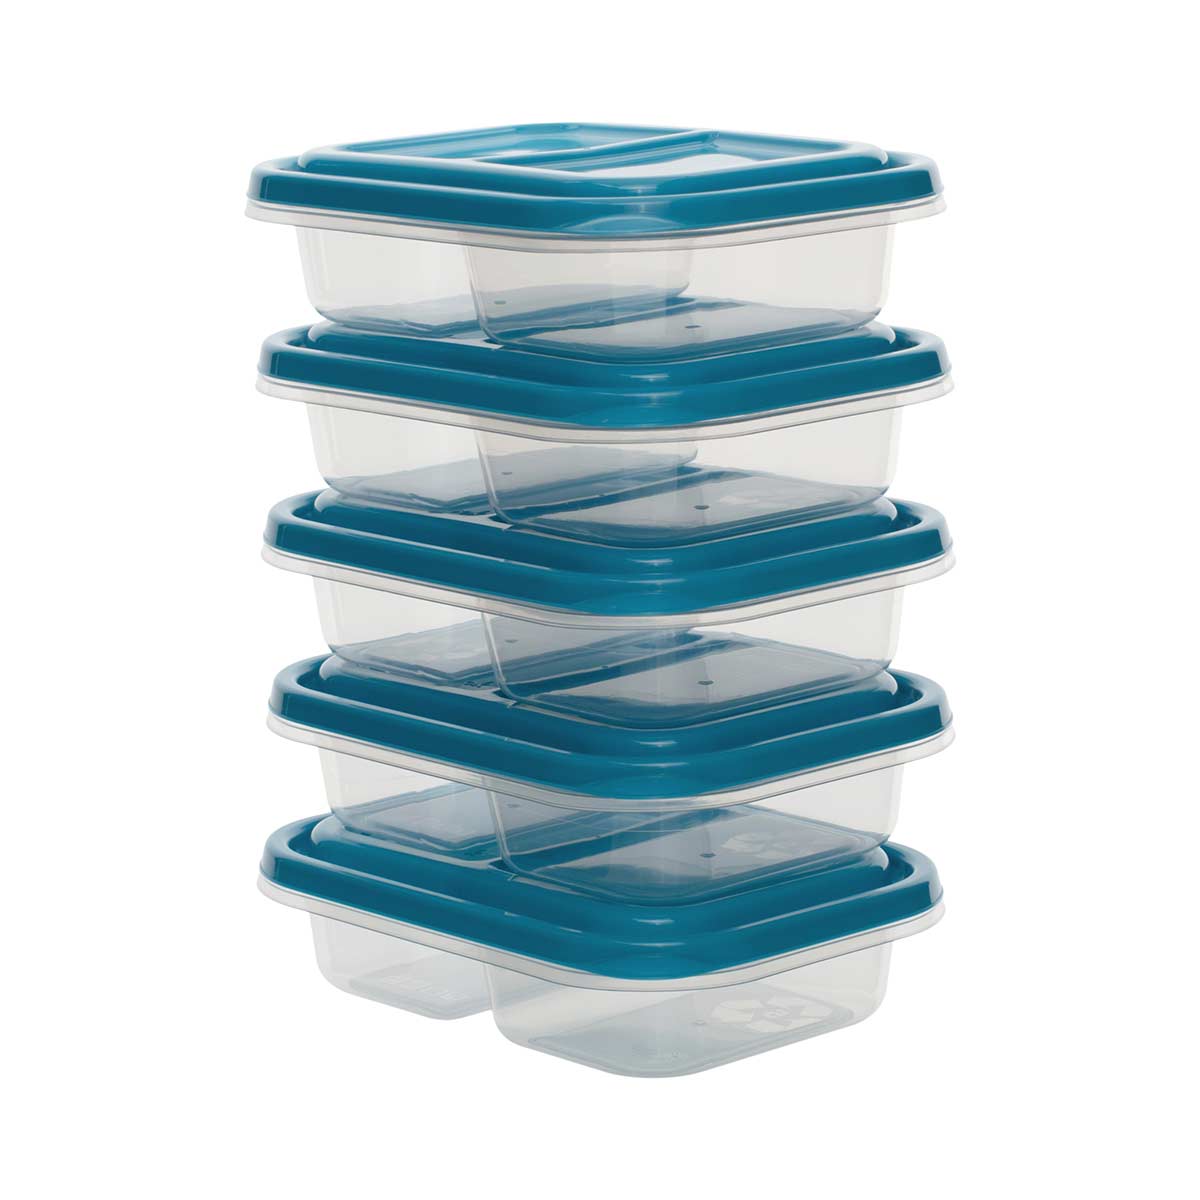 https://www.goodcook.com/media/catalog/product/g/o/goodcook-everyware-snack-pack-container-001.jpg?auto=webp&format=pjpg